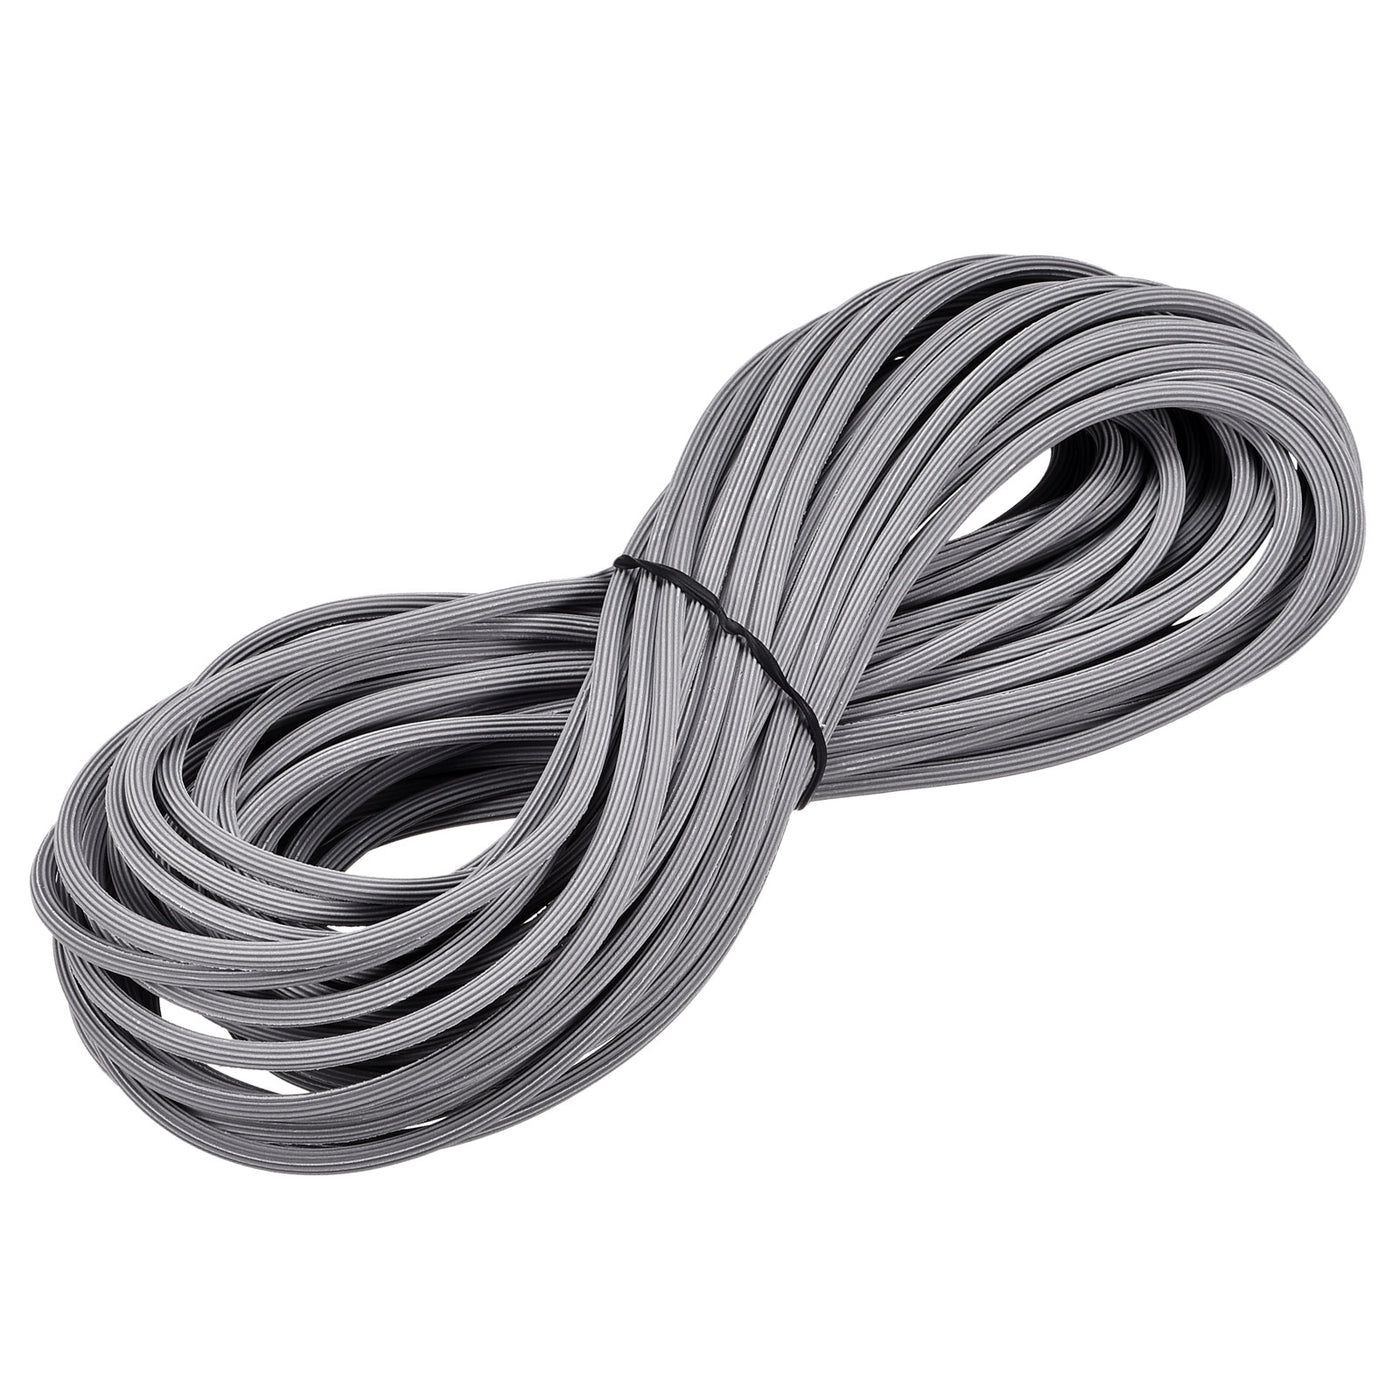 uxcell Uxcell Screen Spline 12M/39.37Ft Length PVC Sealing Strip Retainer, 3.5mm OD Gray